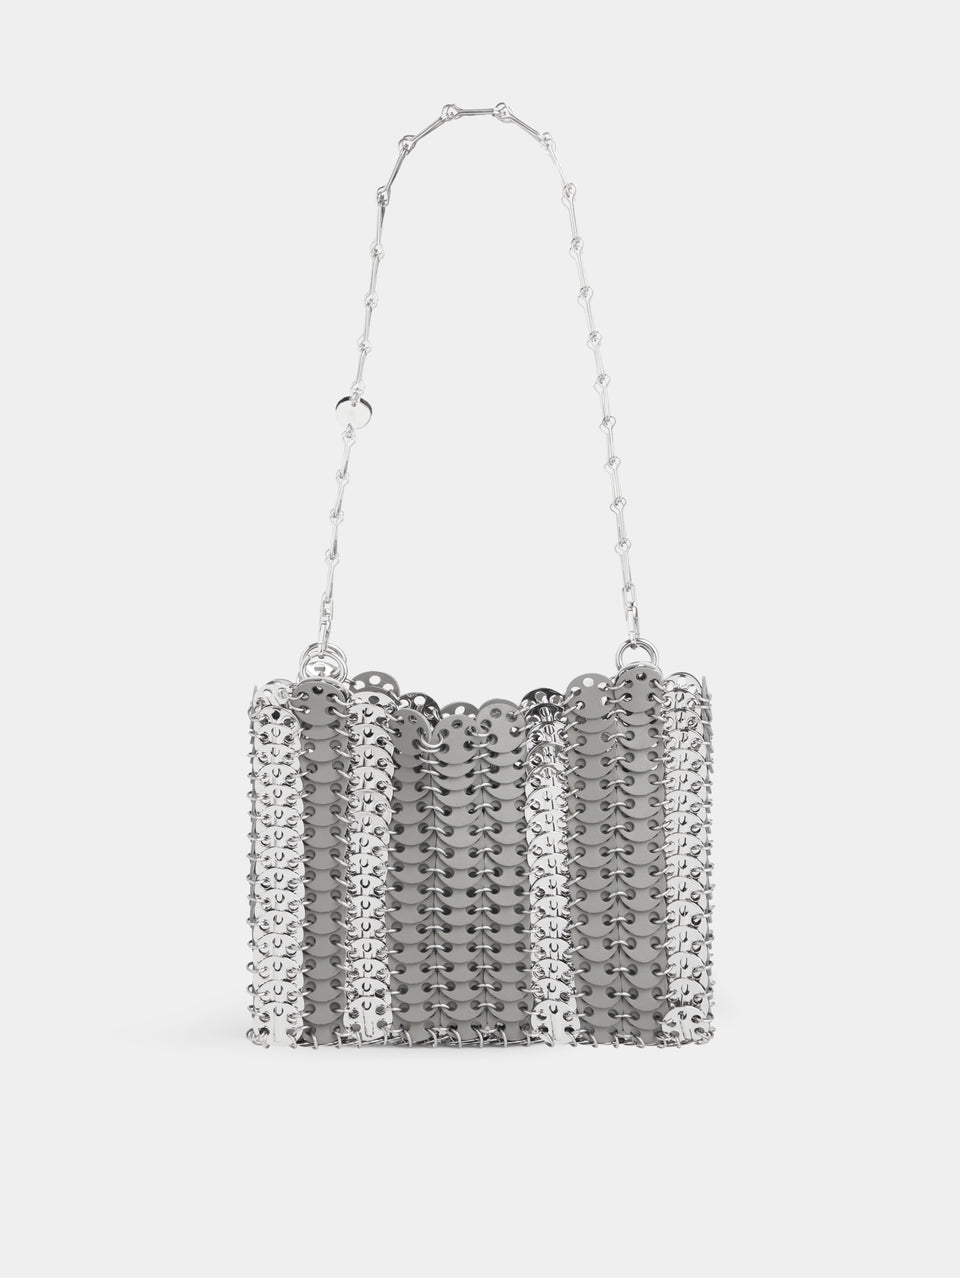 GREY 1969 SQUARE BAG IN METAL AND LEATHER MIX